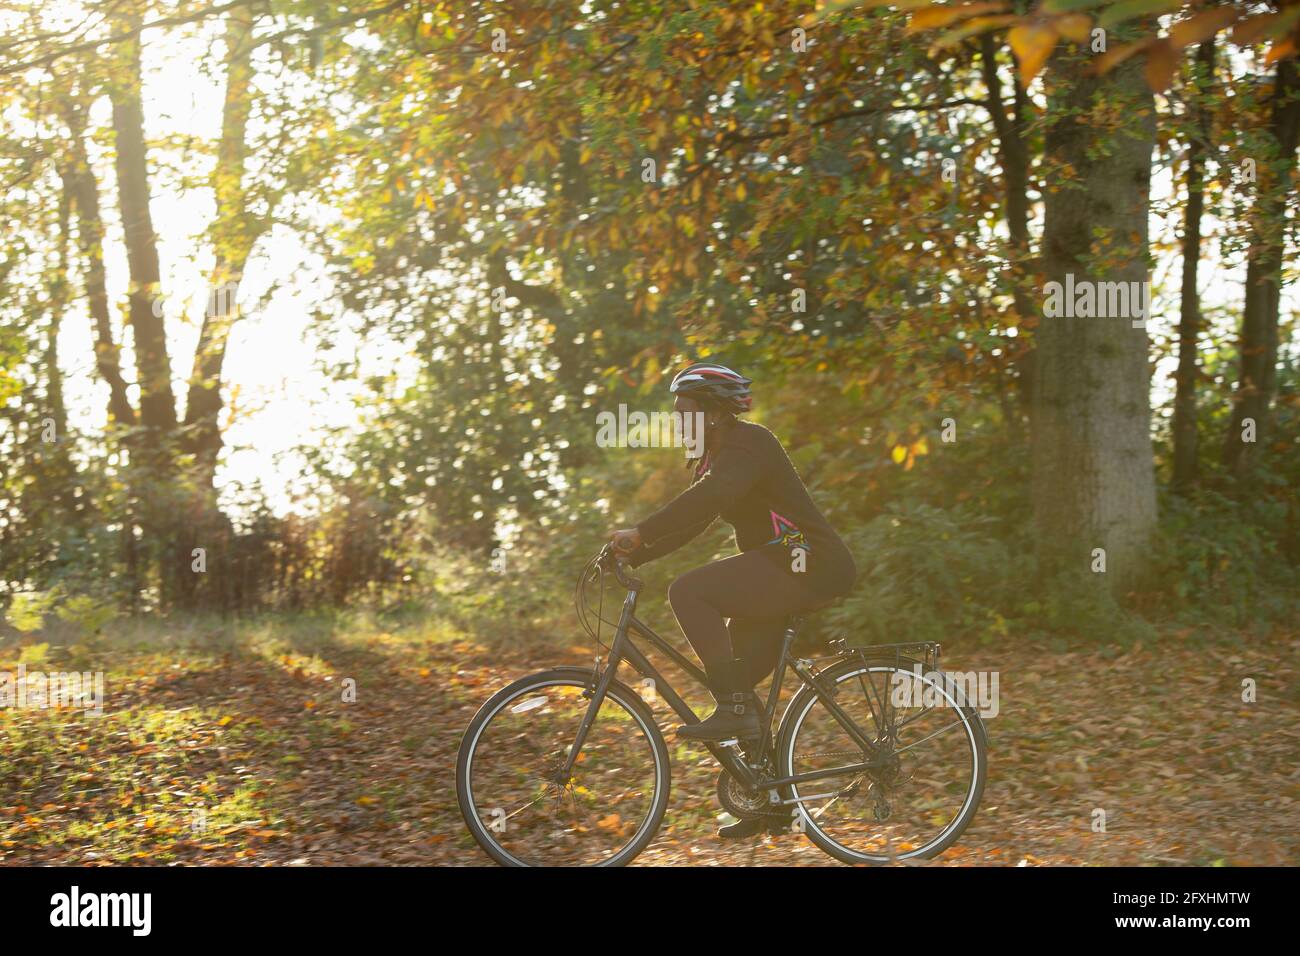 Happy woman bike riding among autumn leaves in sunny park Stock Photo